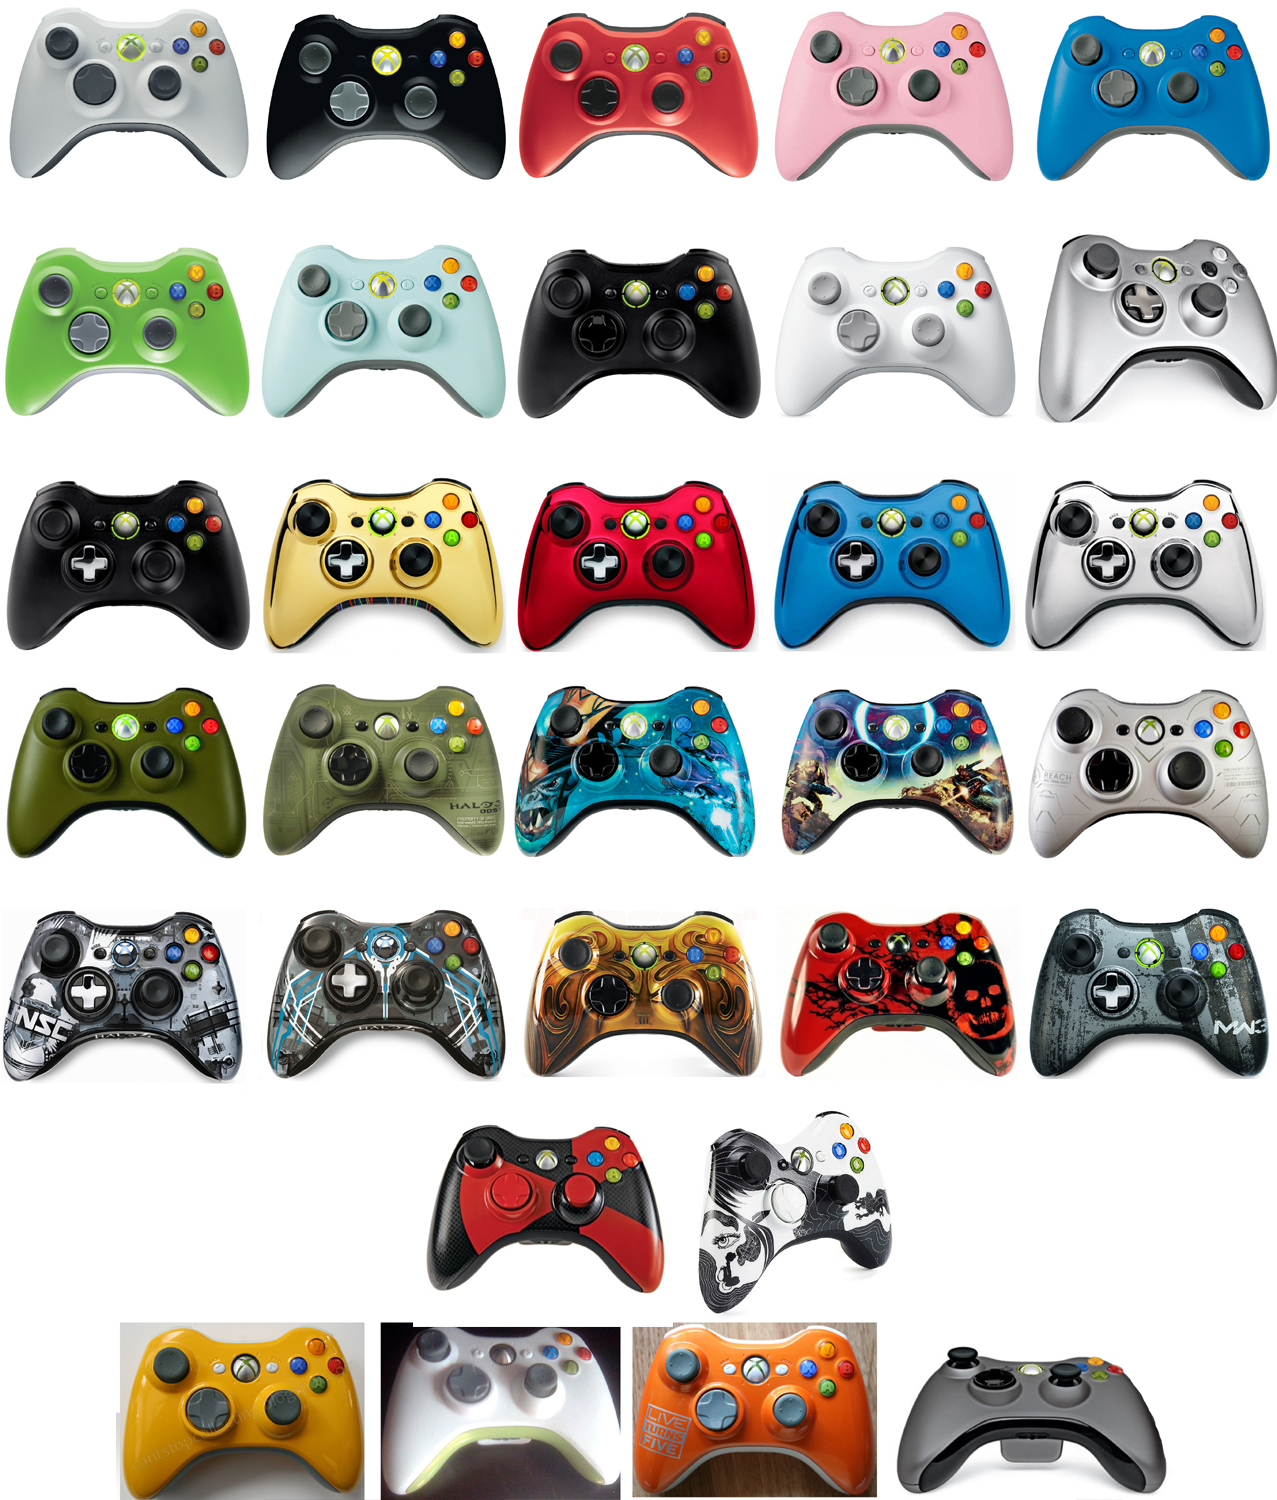 Every 360 controller ever produced by Microsoft, and where to find them *UPDATED*